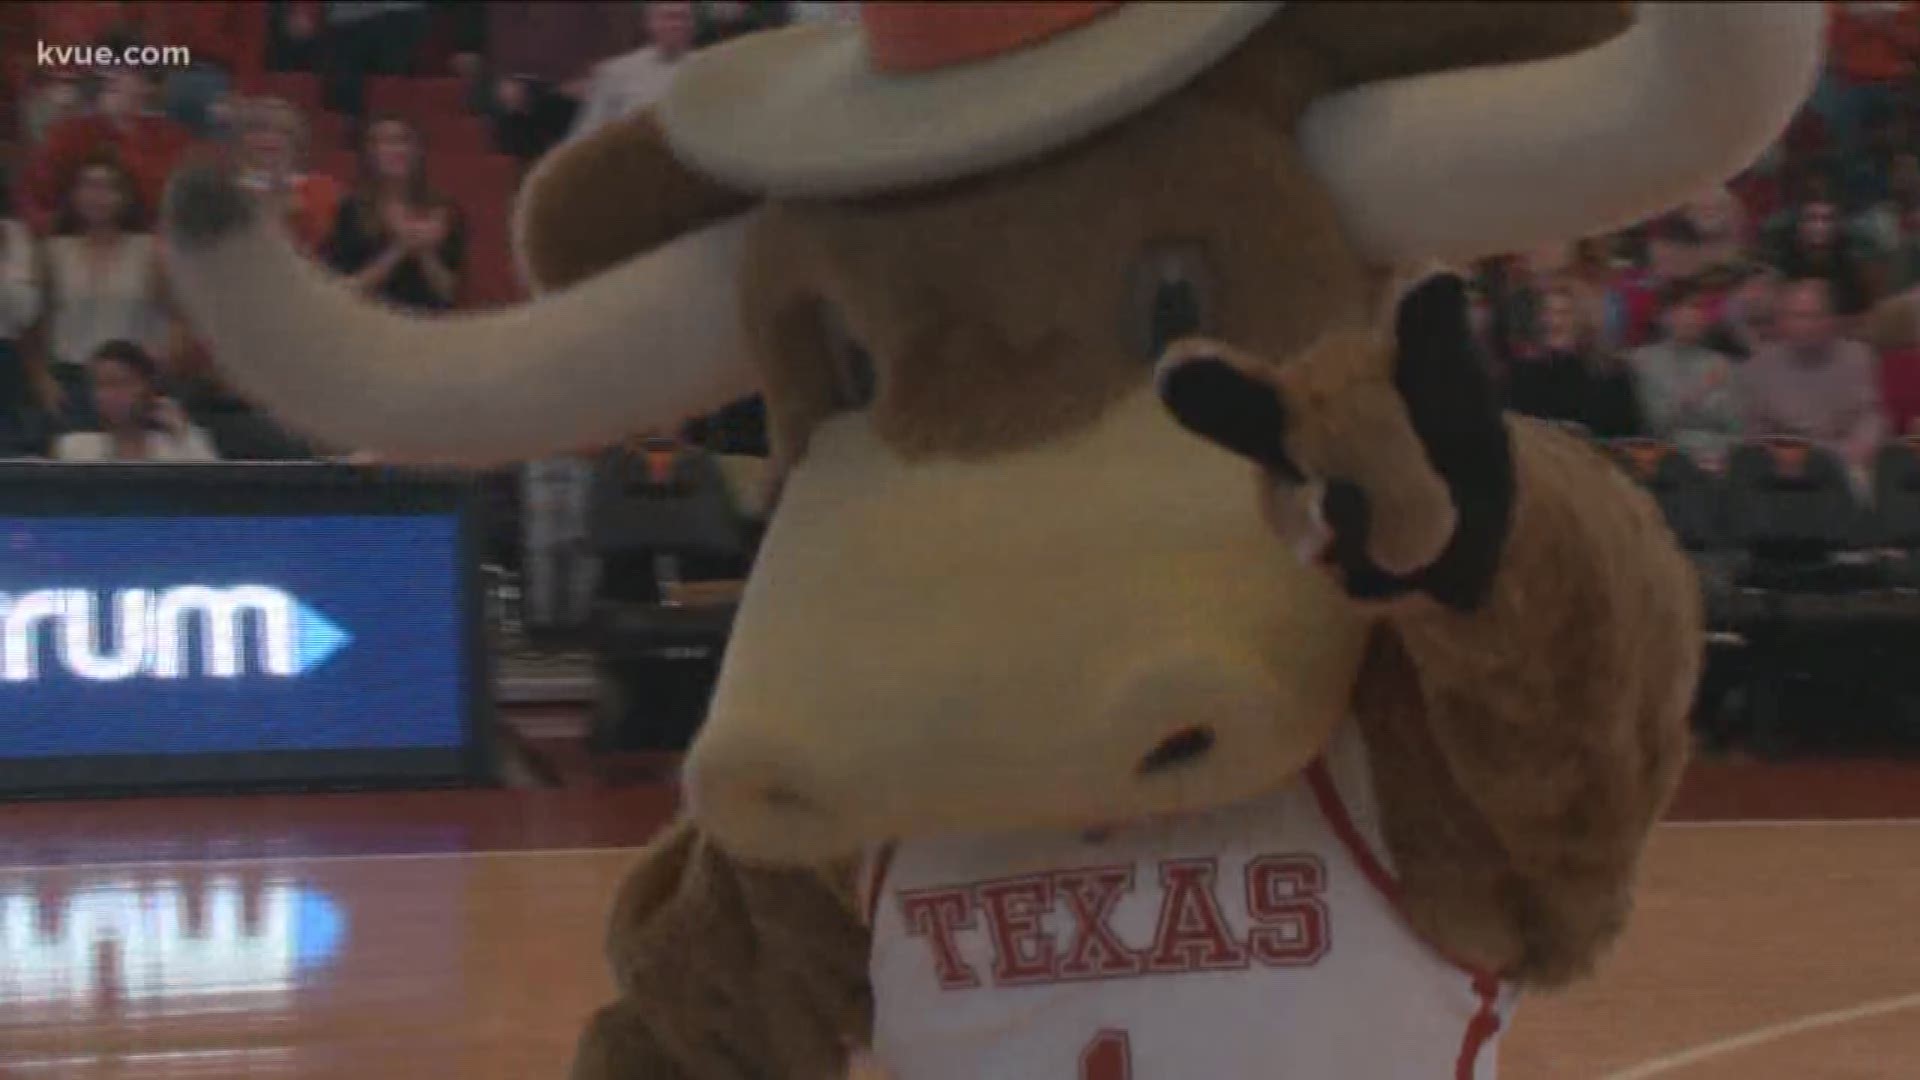 Tom Herman's Longhorns were honored for their Sugar Bowl win at the men's basketball game against OU.